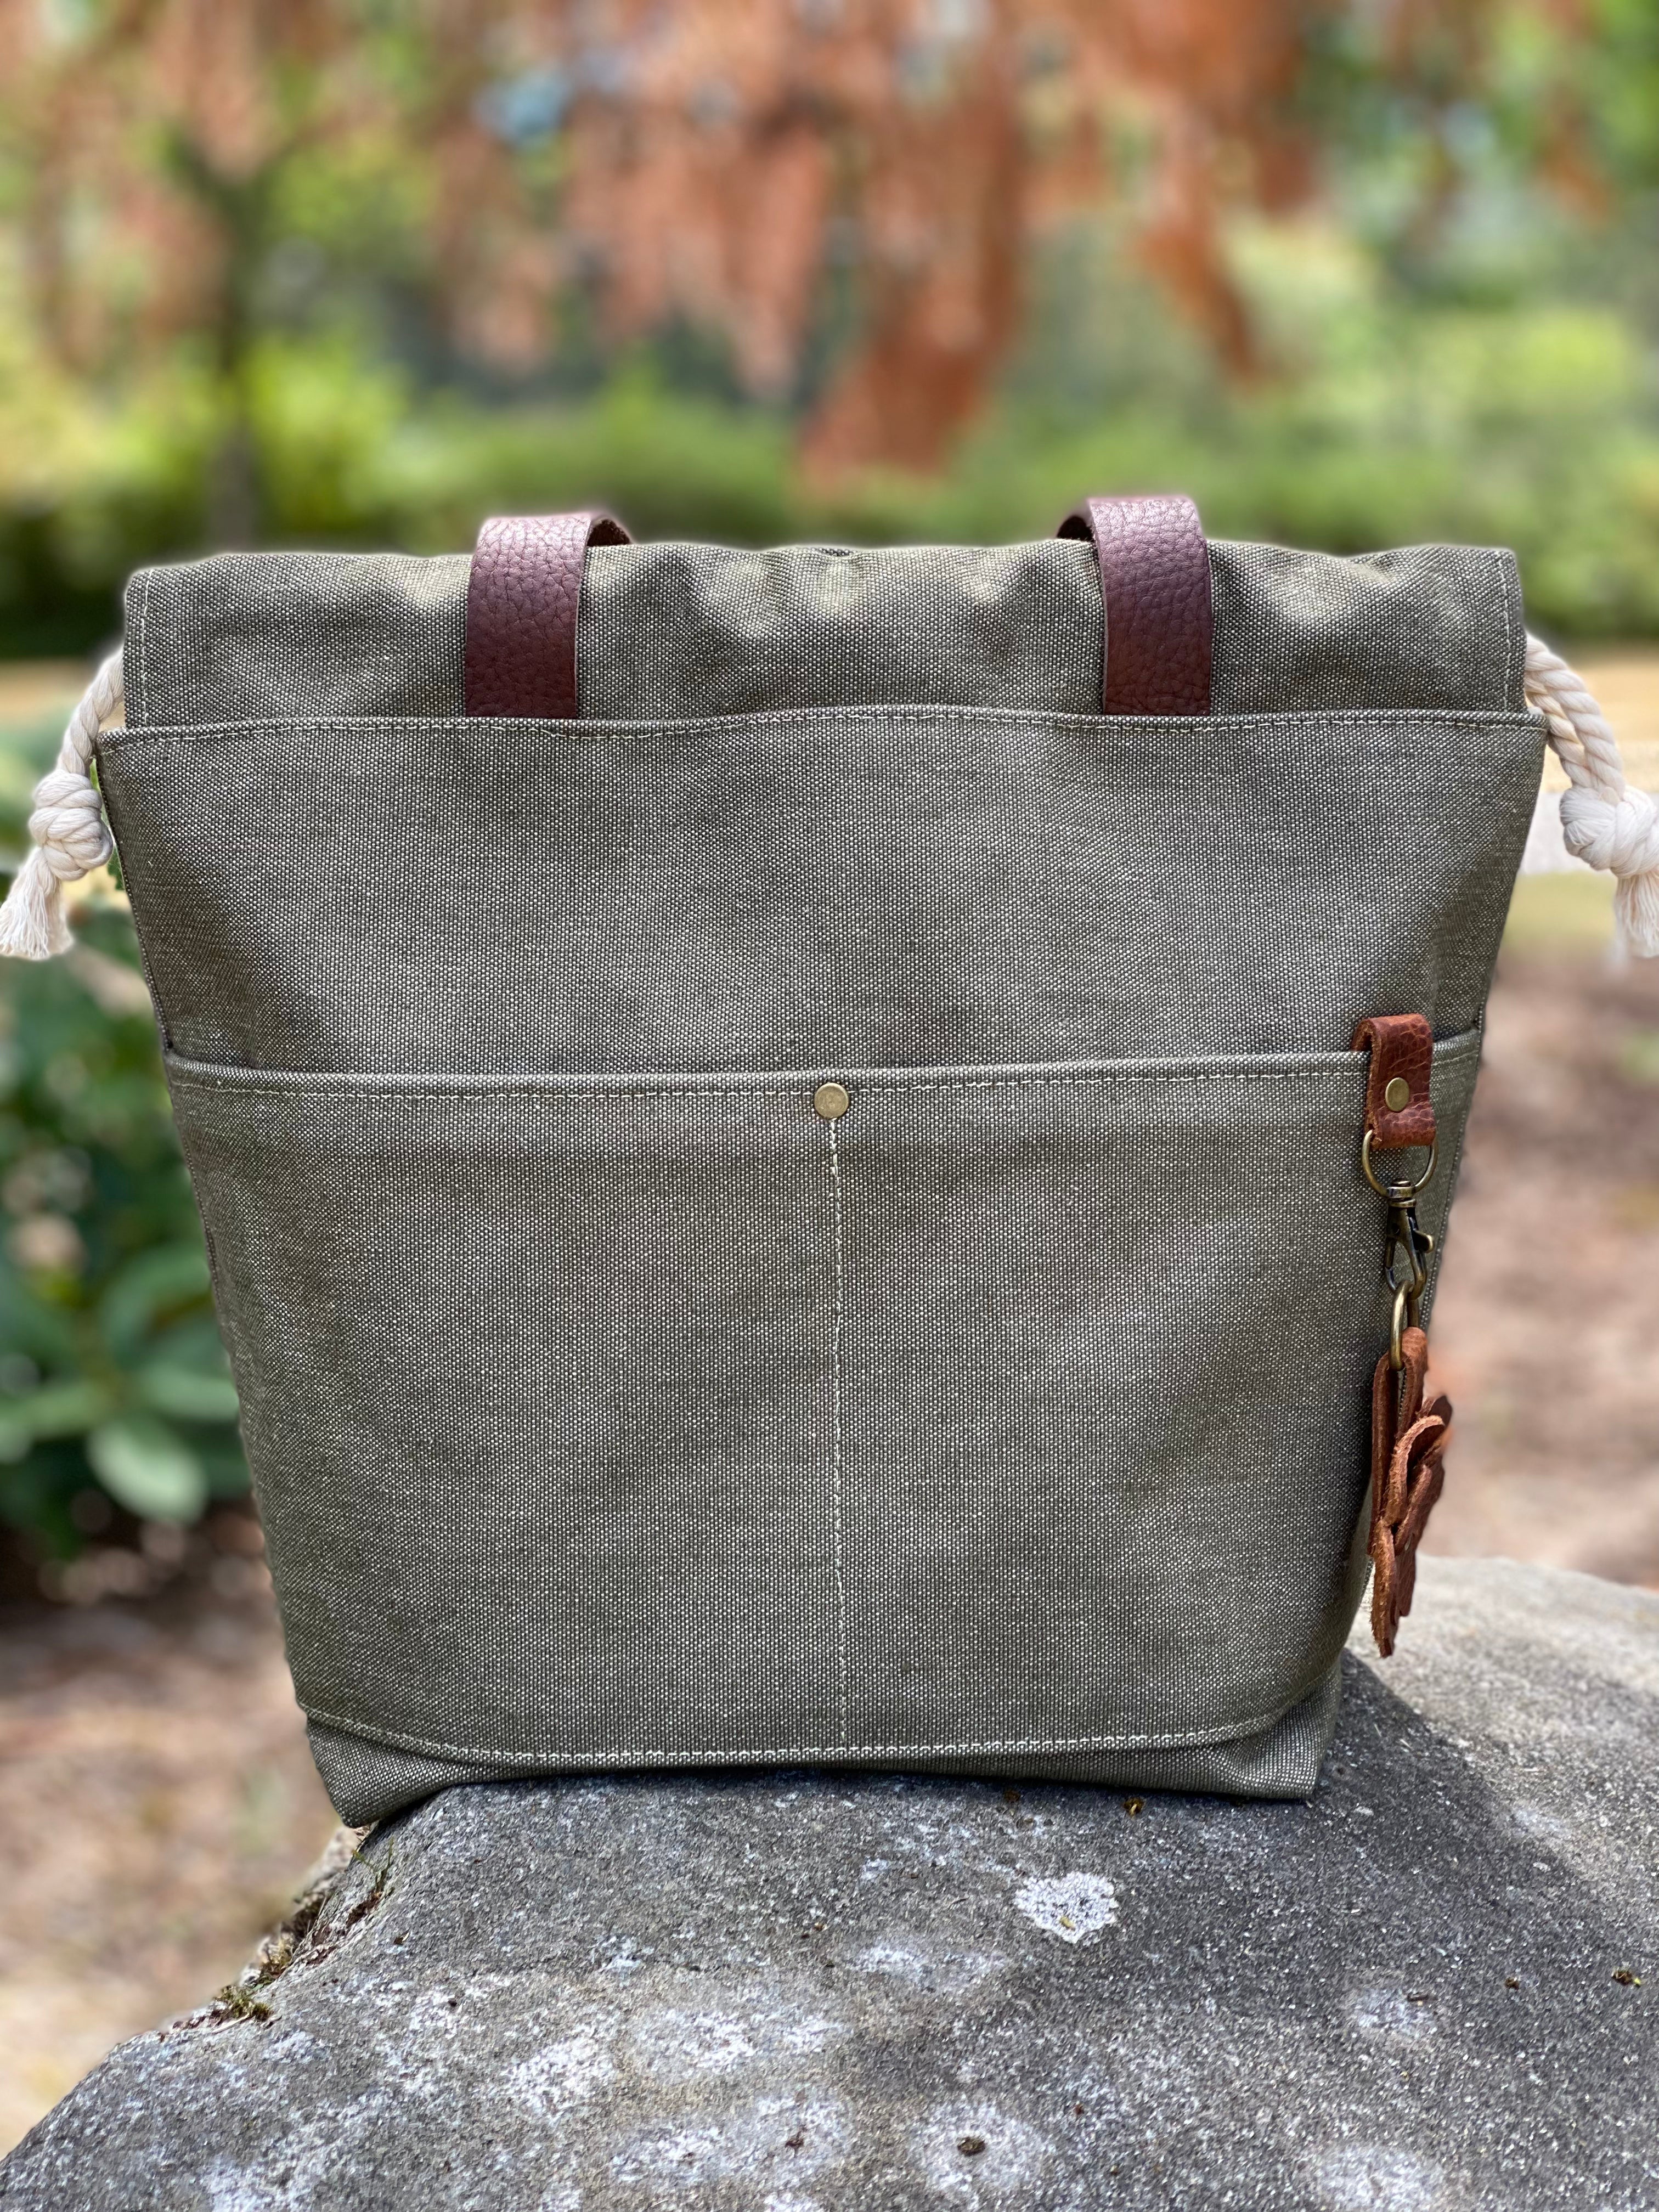 Olive Green Army Duck 18 Oz Canvas Project Bag Knit or Crochet Drawstring Tote Leather Strap Flat Bottom